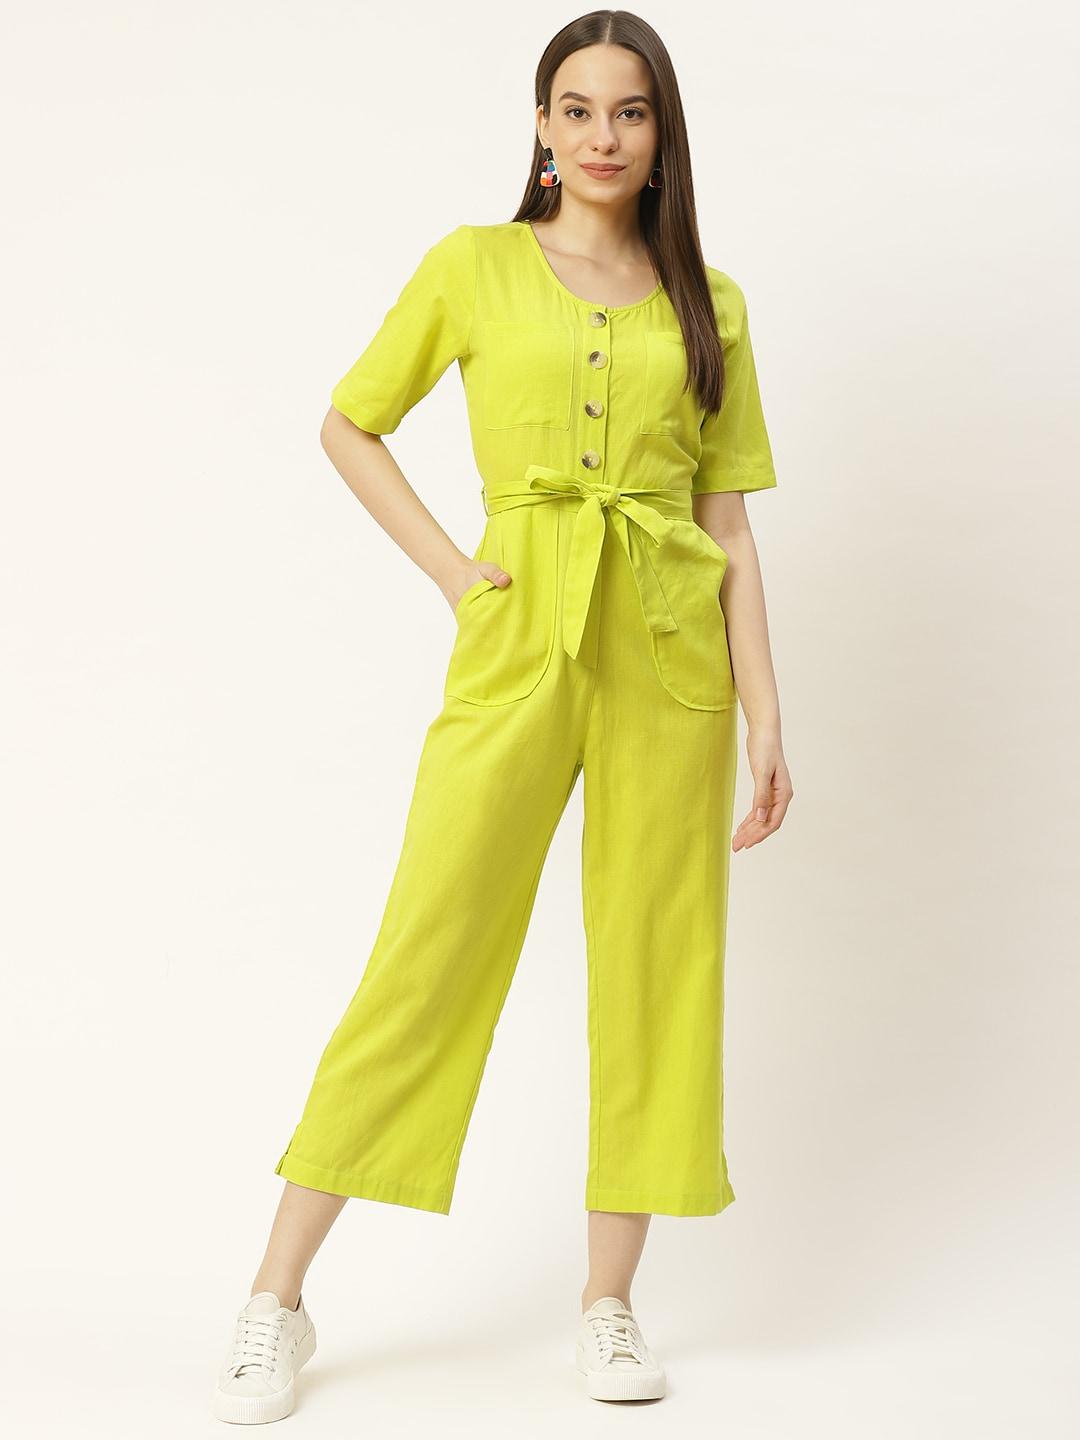 aayna lime green linen culotte jumpsuit